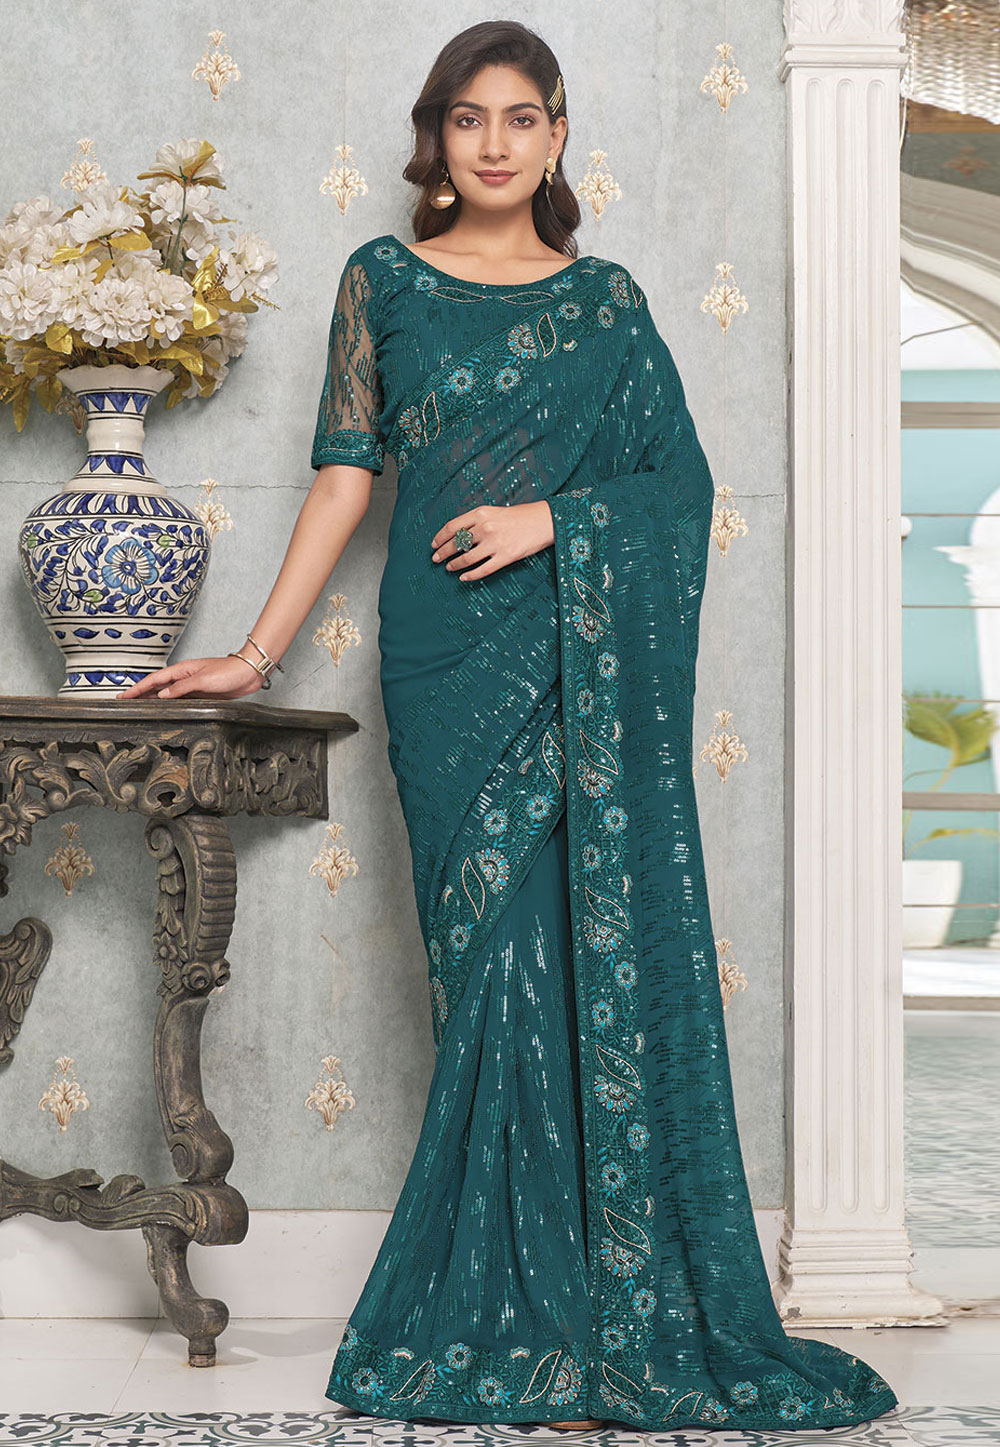 Teal Faux Georgette Saree With Blouse 279841